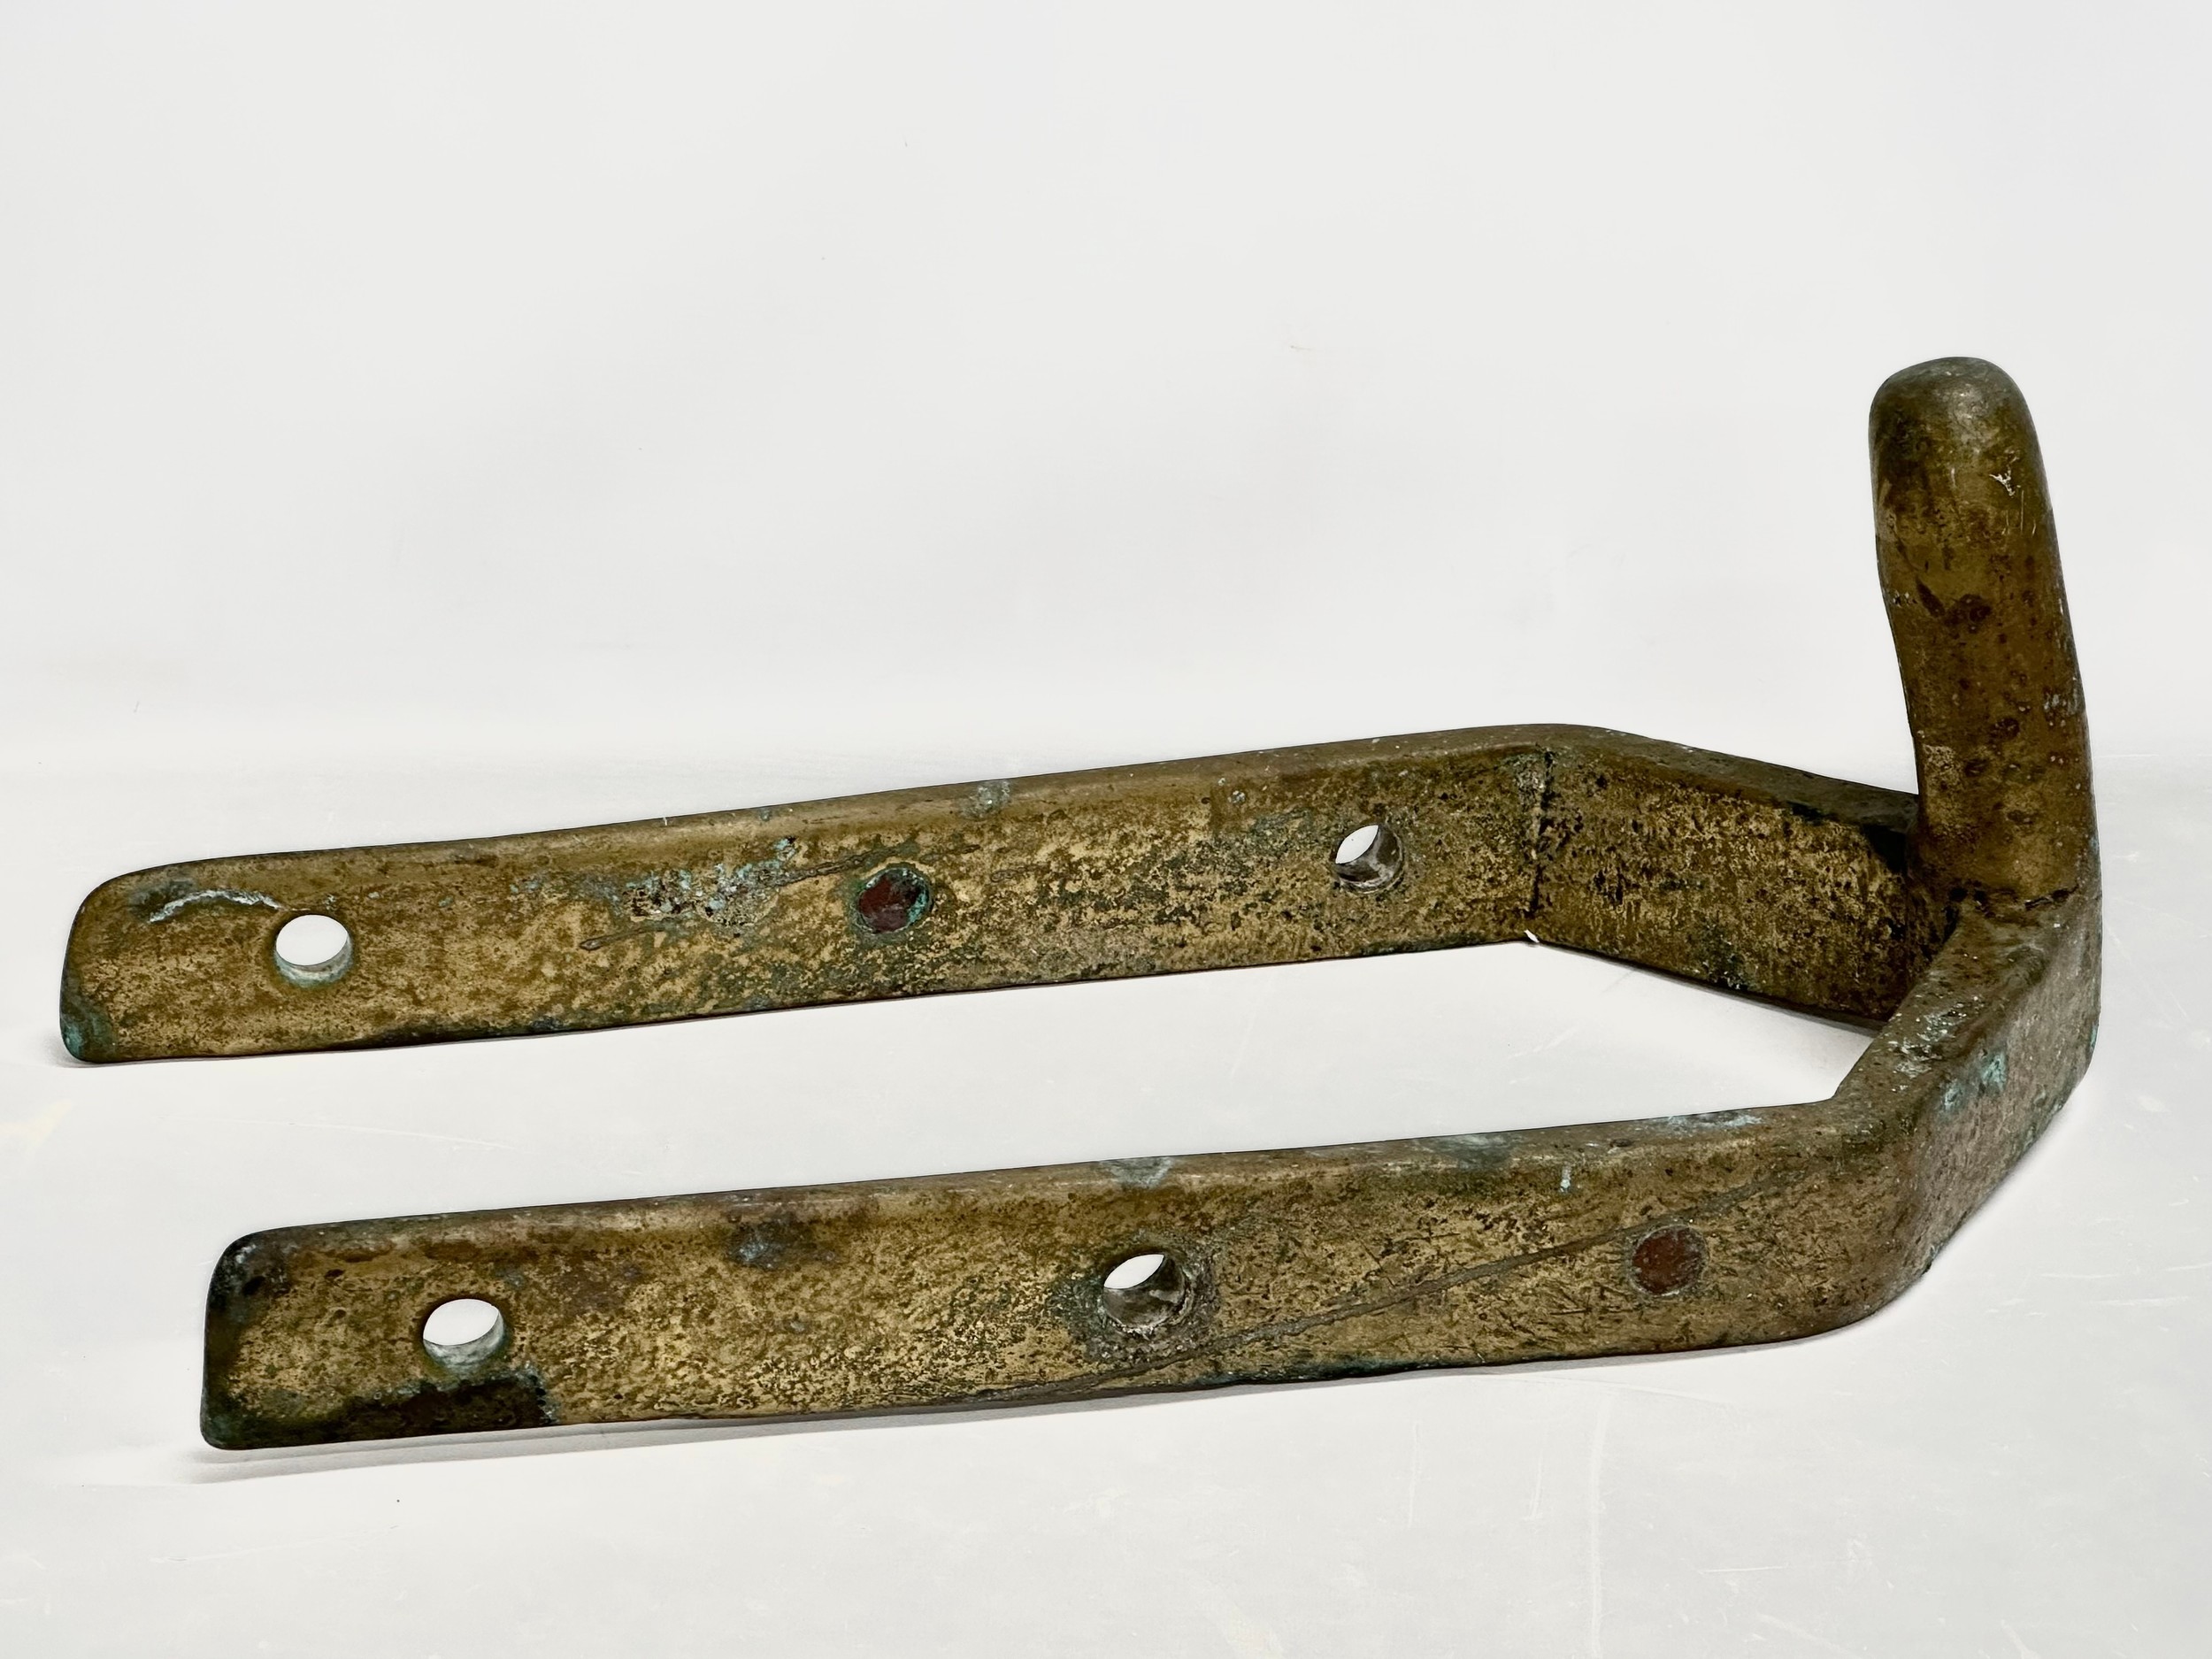 Two 16th Century bronze Gudgeons reportedly from a Spanish Galleon, 71x33x27cm - Image 2 of 7